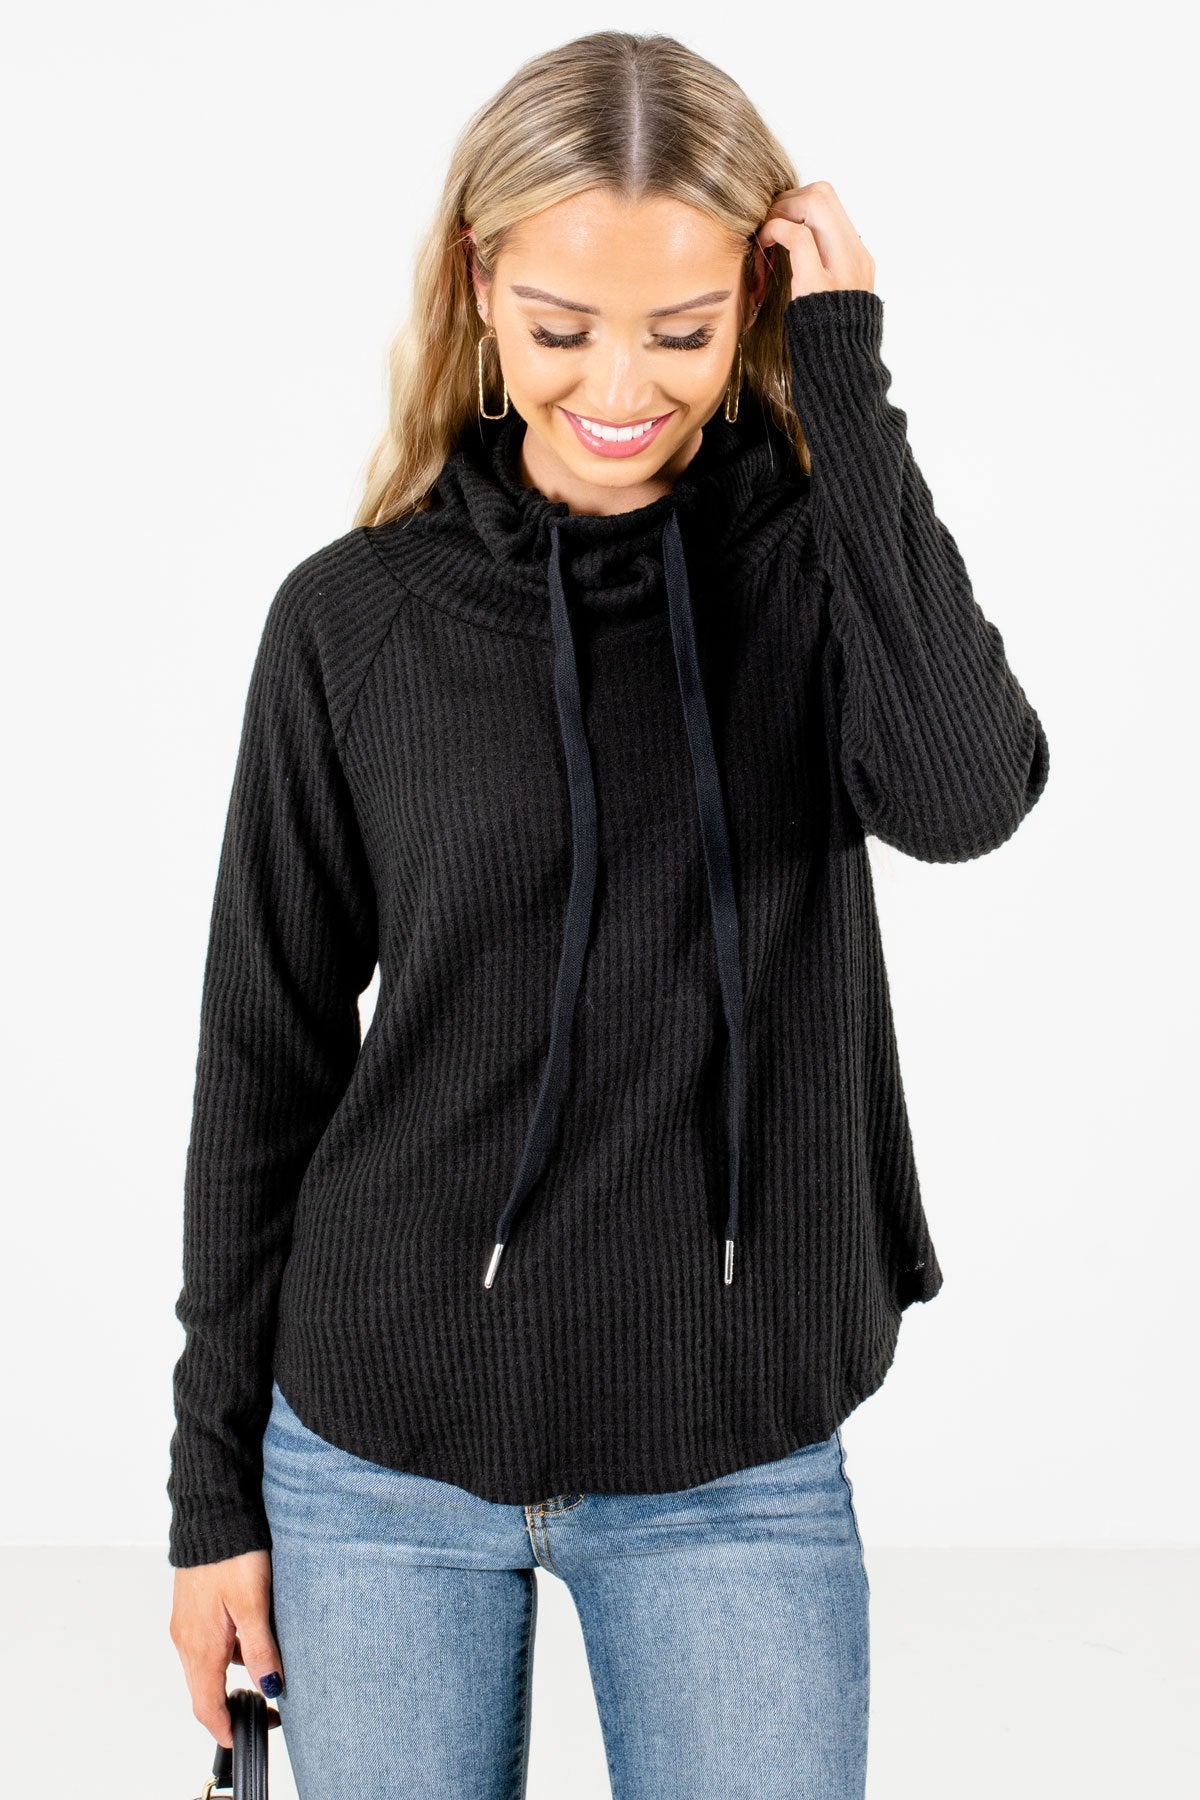 Black High-Quality Waffle Knit Material Boutique Sweaters for Women